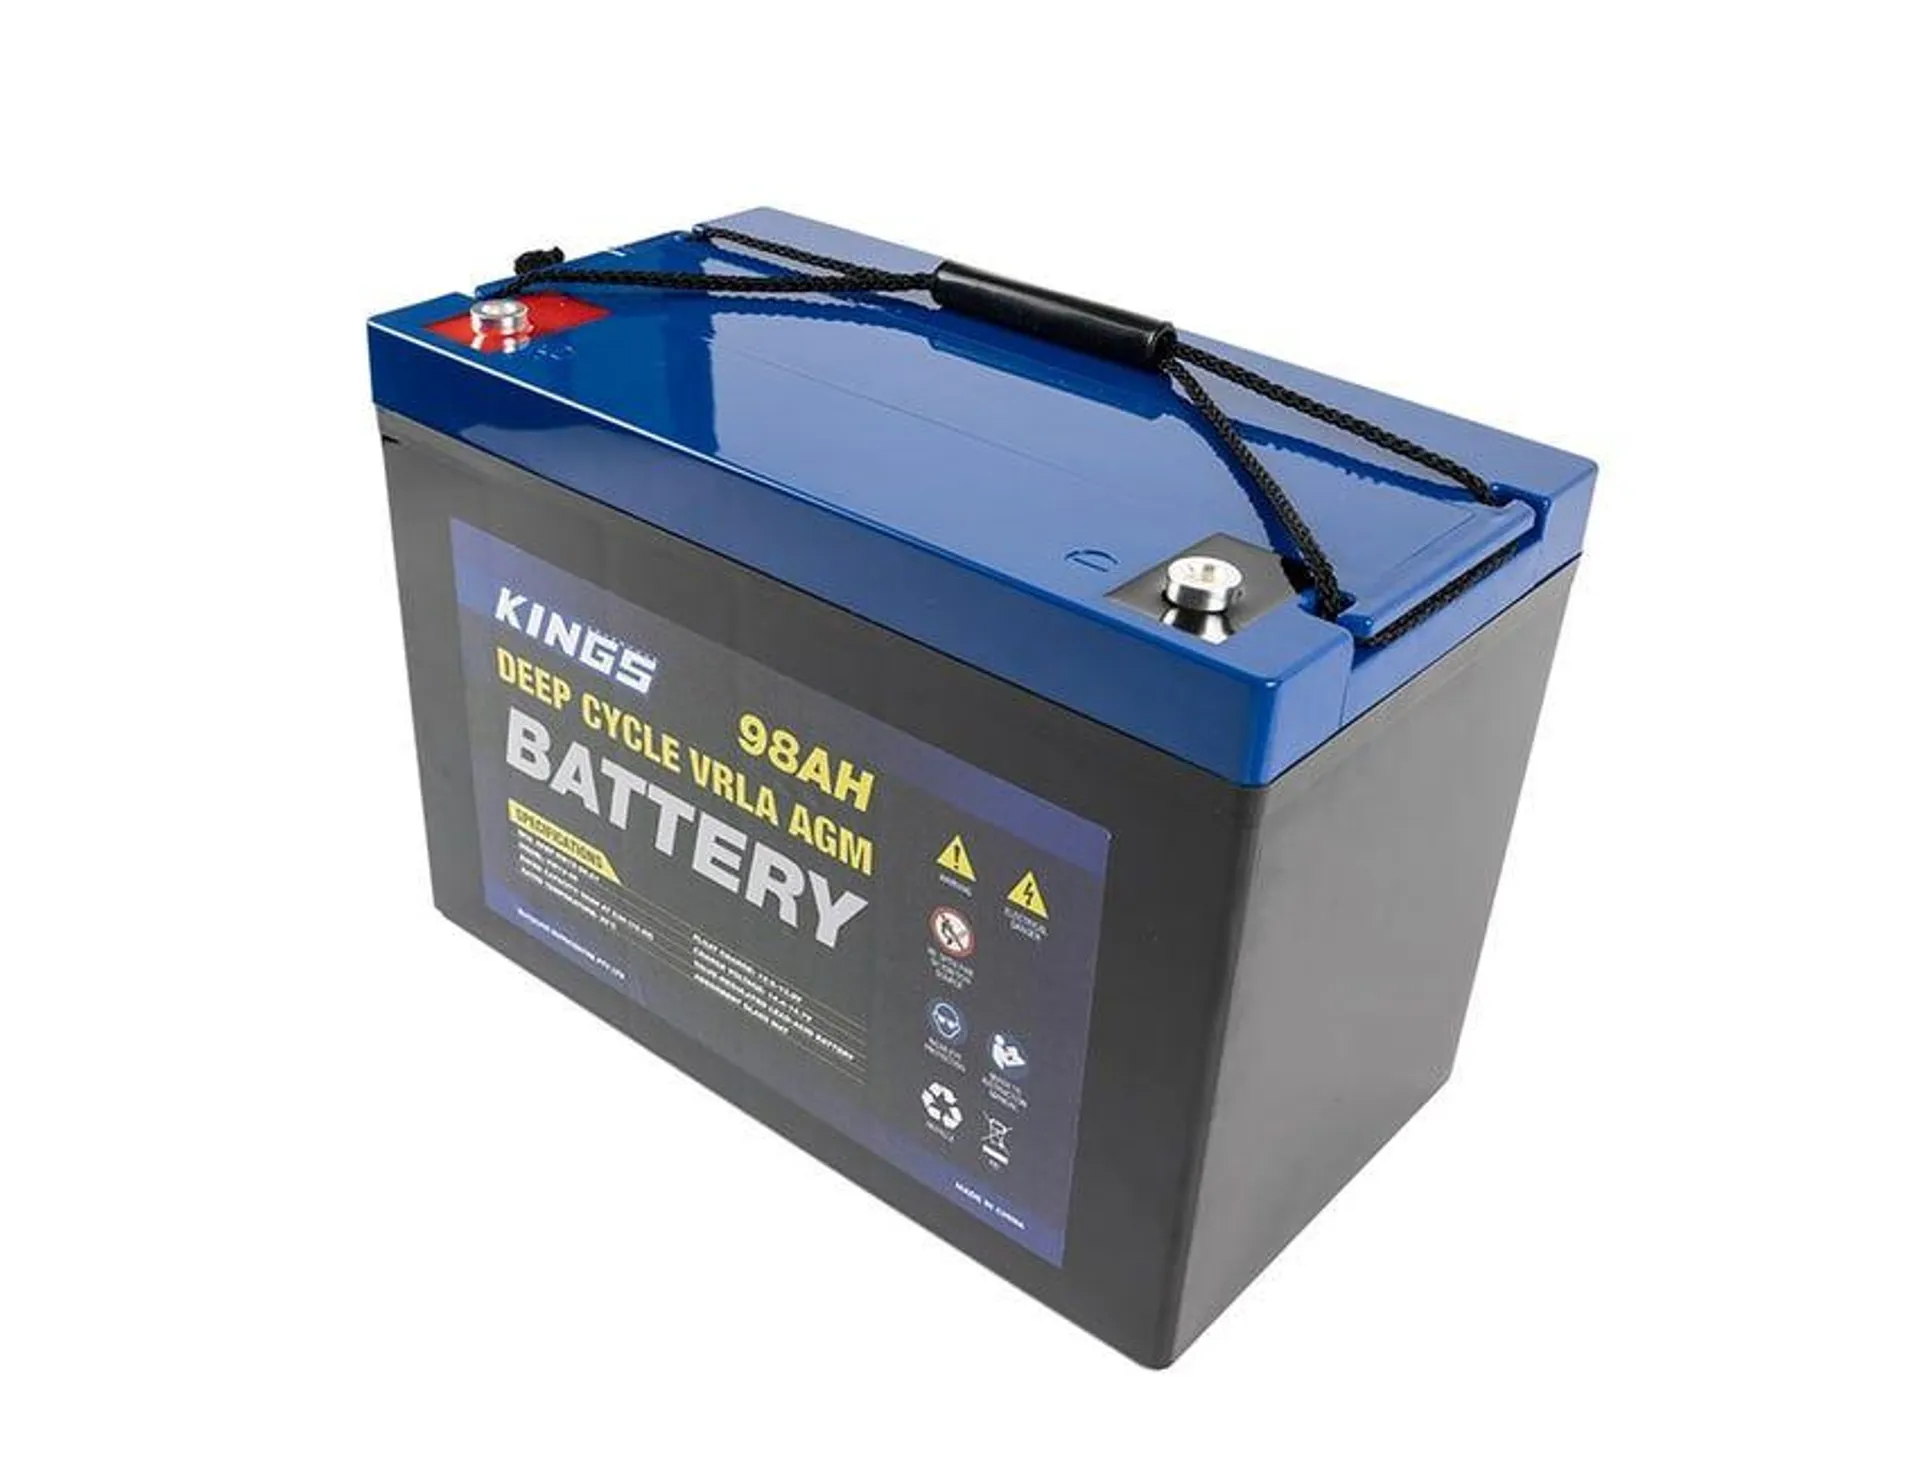 Kings 98Ah 12V AGM Deep Cycle Battery | 5x Faster Recharging | Maintenance-Free | Up to 1500 Cycles